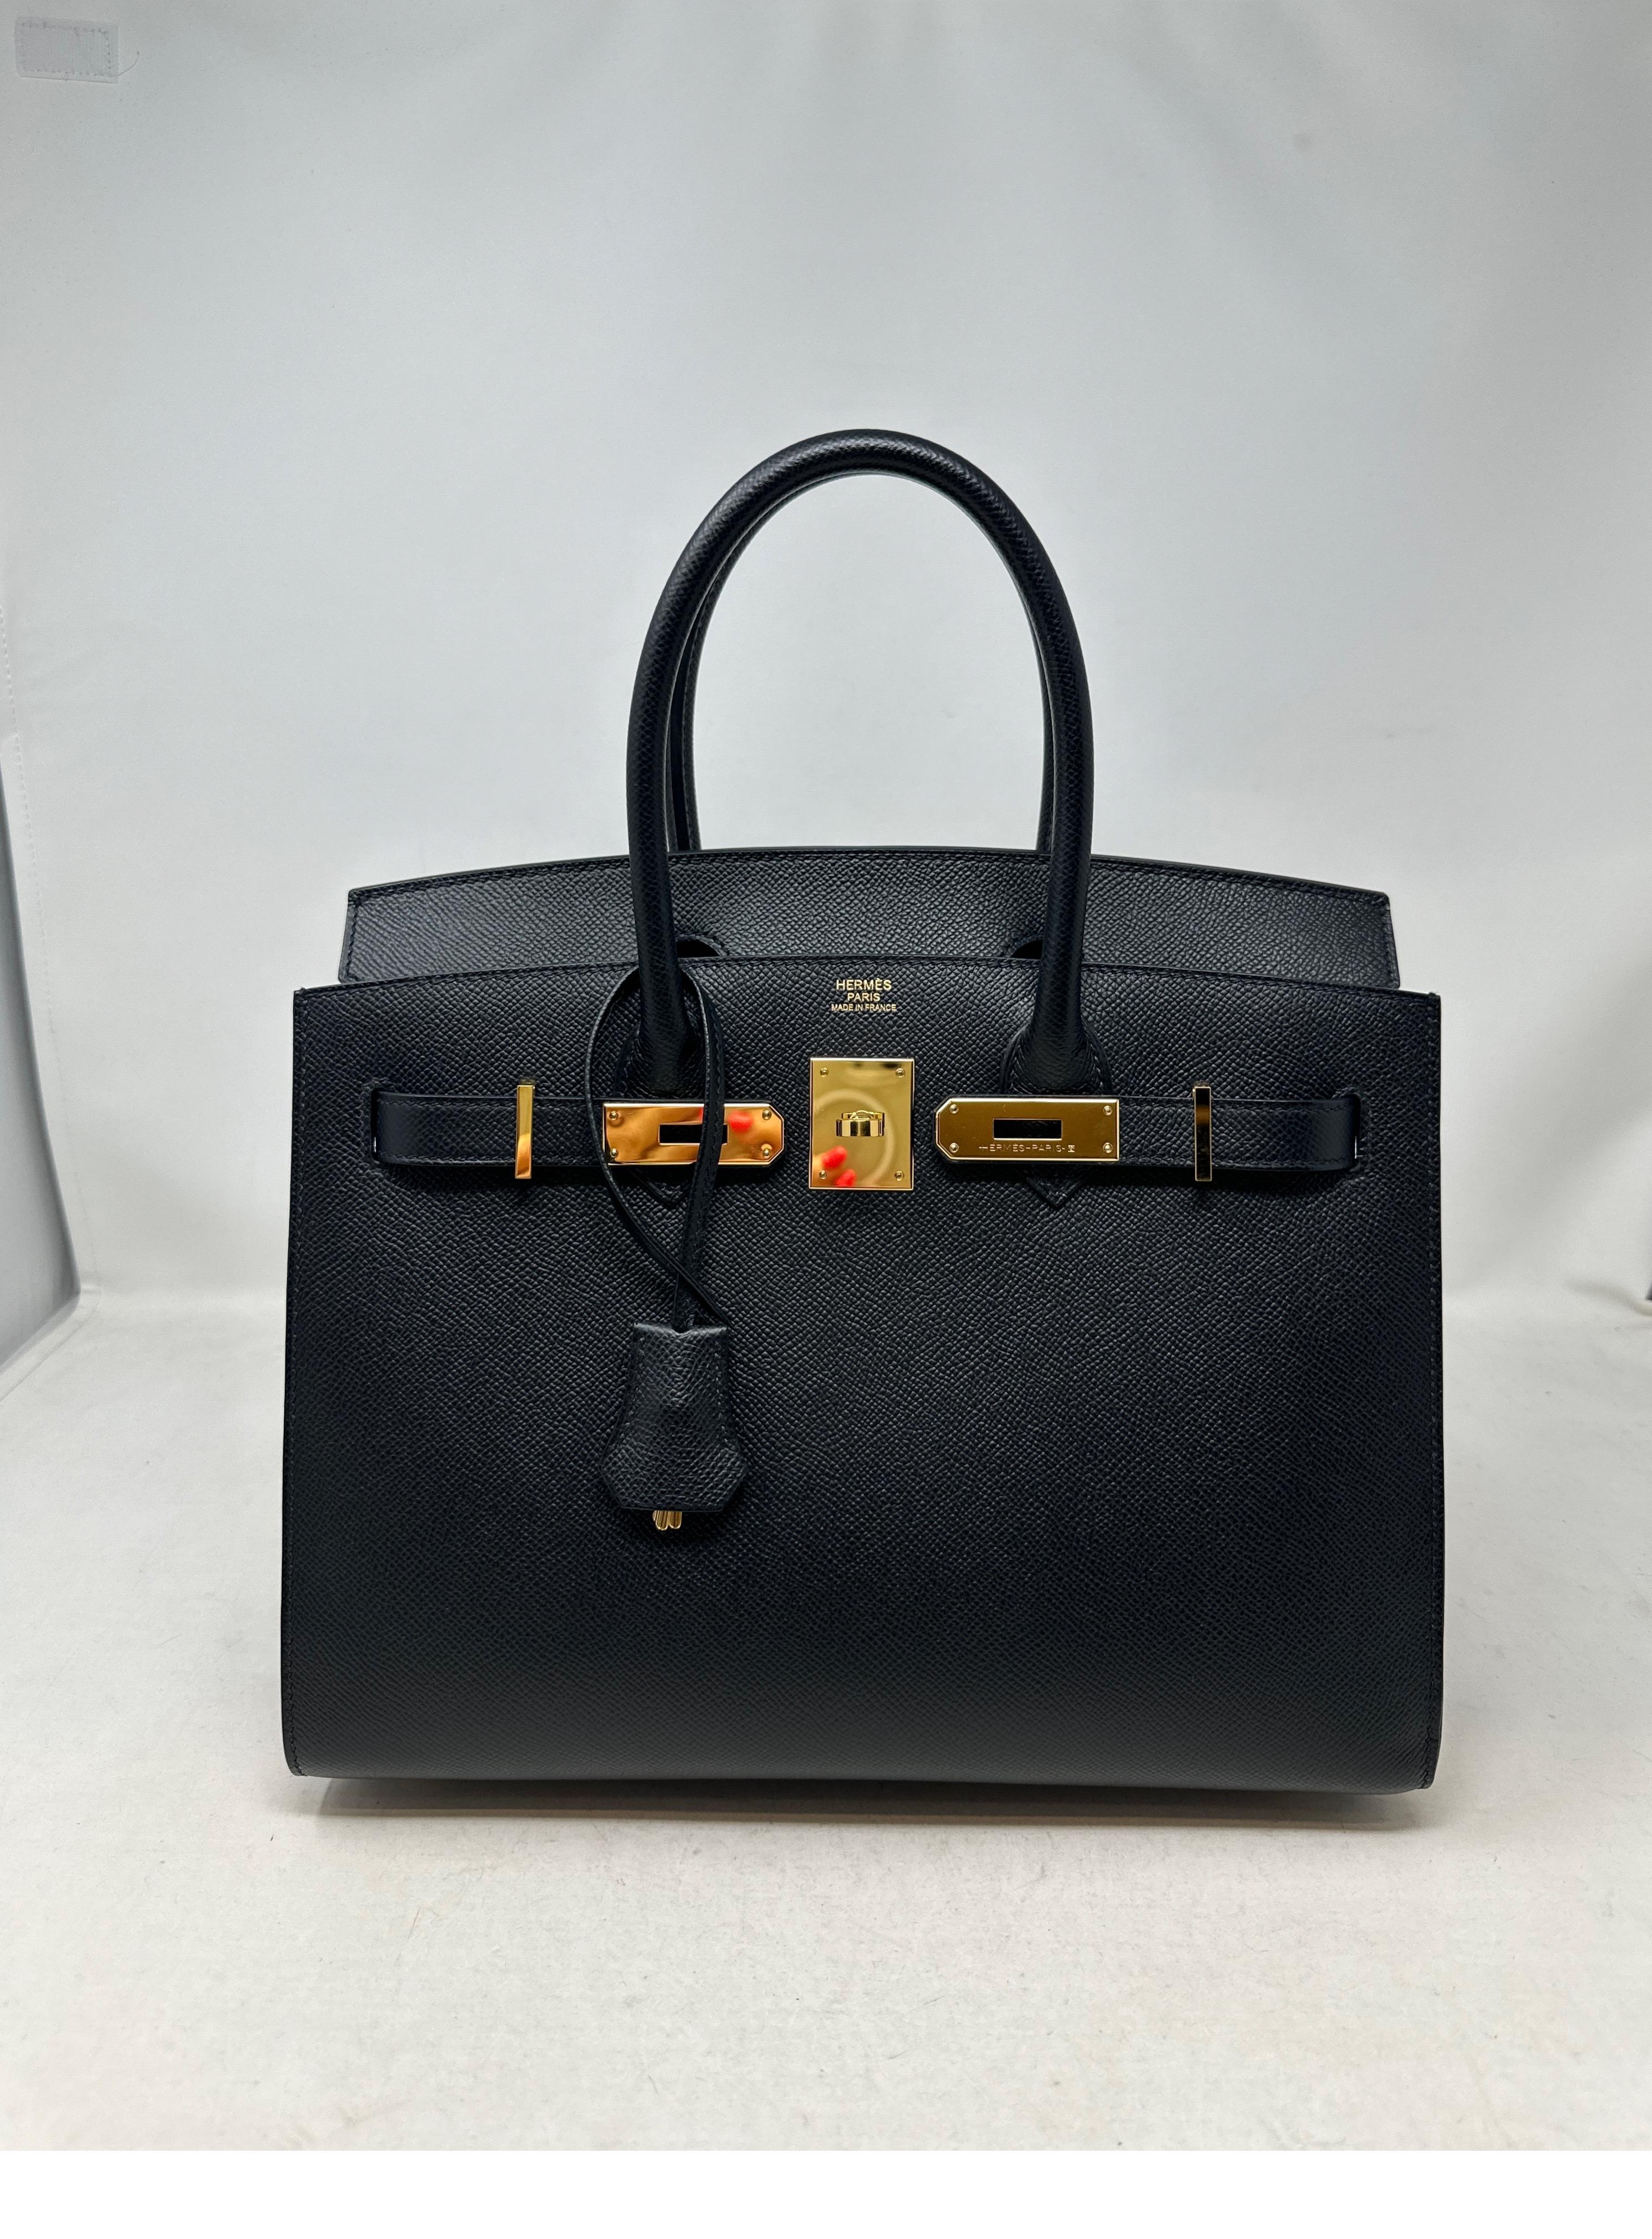 Hermes Black Sellier Birkin 30 Bag. New Birkin bag with gold hardware. Most wanted sellier and black bag. Plastic is still on hardware. Never used. Great combination. Includes clochette, lock, keys, dust bag, and box. Full set. Includes orginal